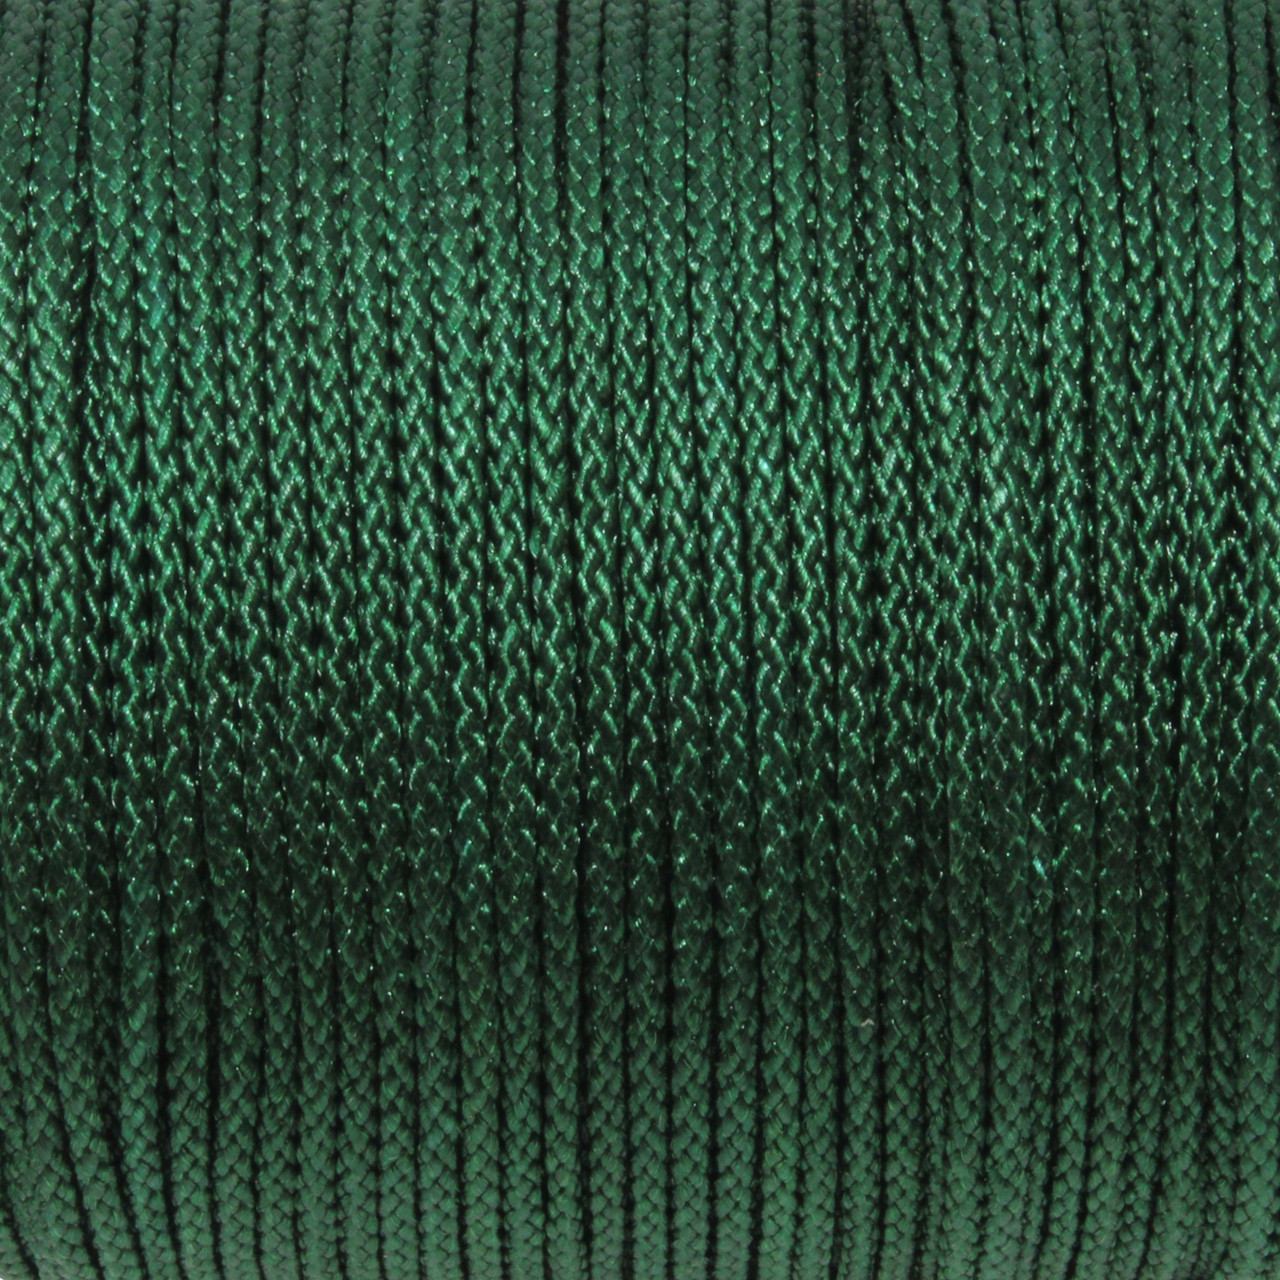 Dark Green - 2mm Braided Polyester Cord - Sold by the Foot - Bead World